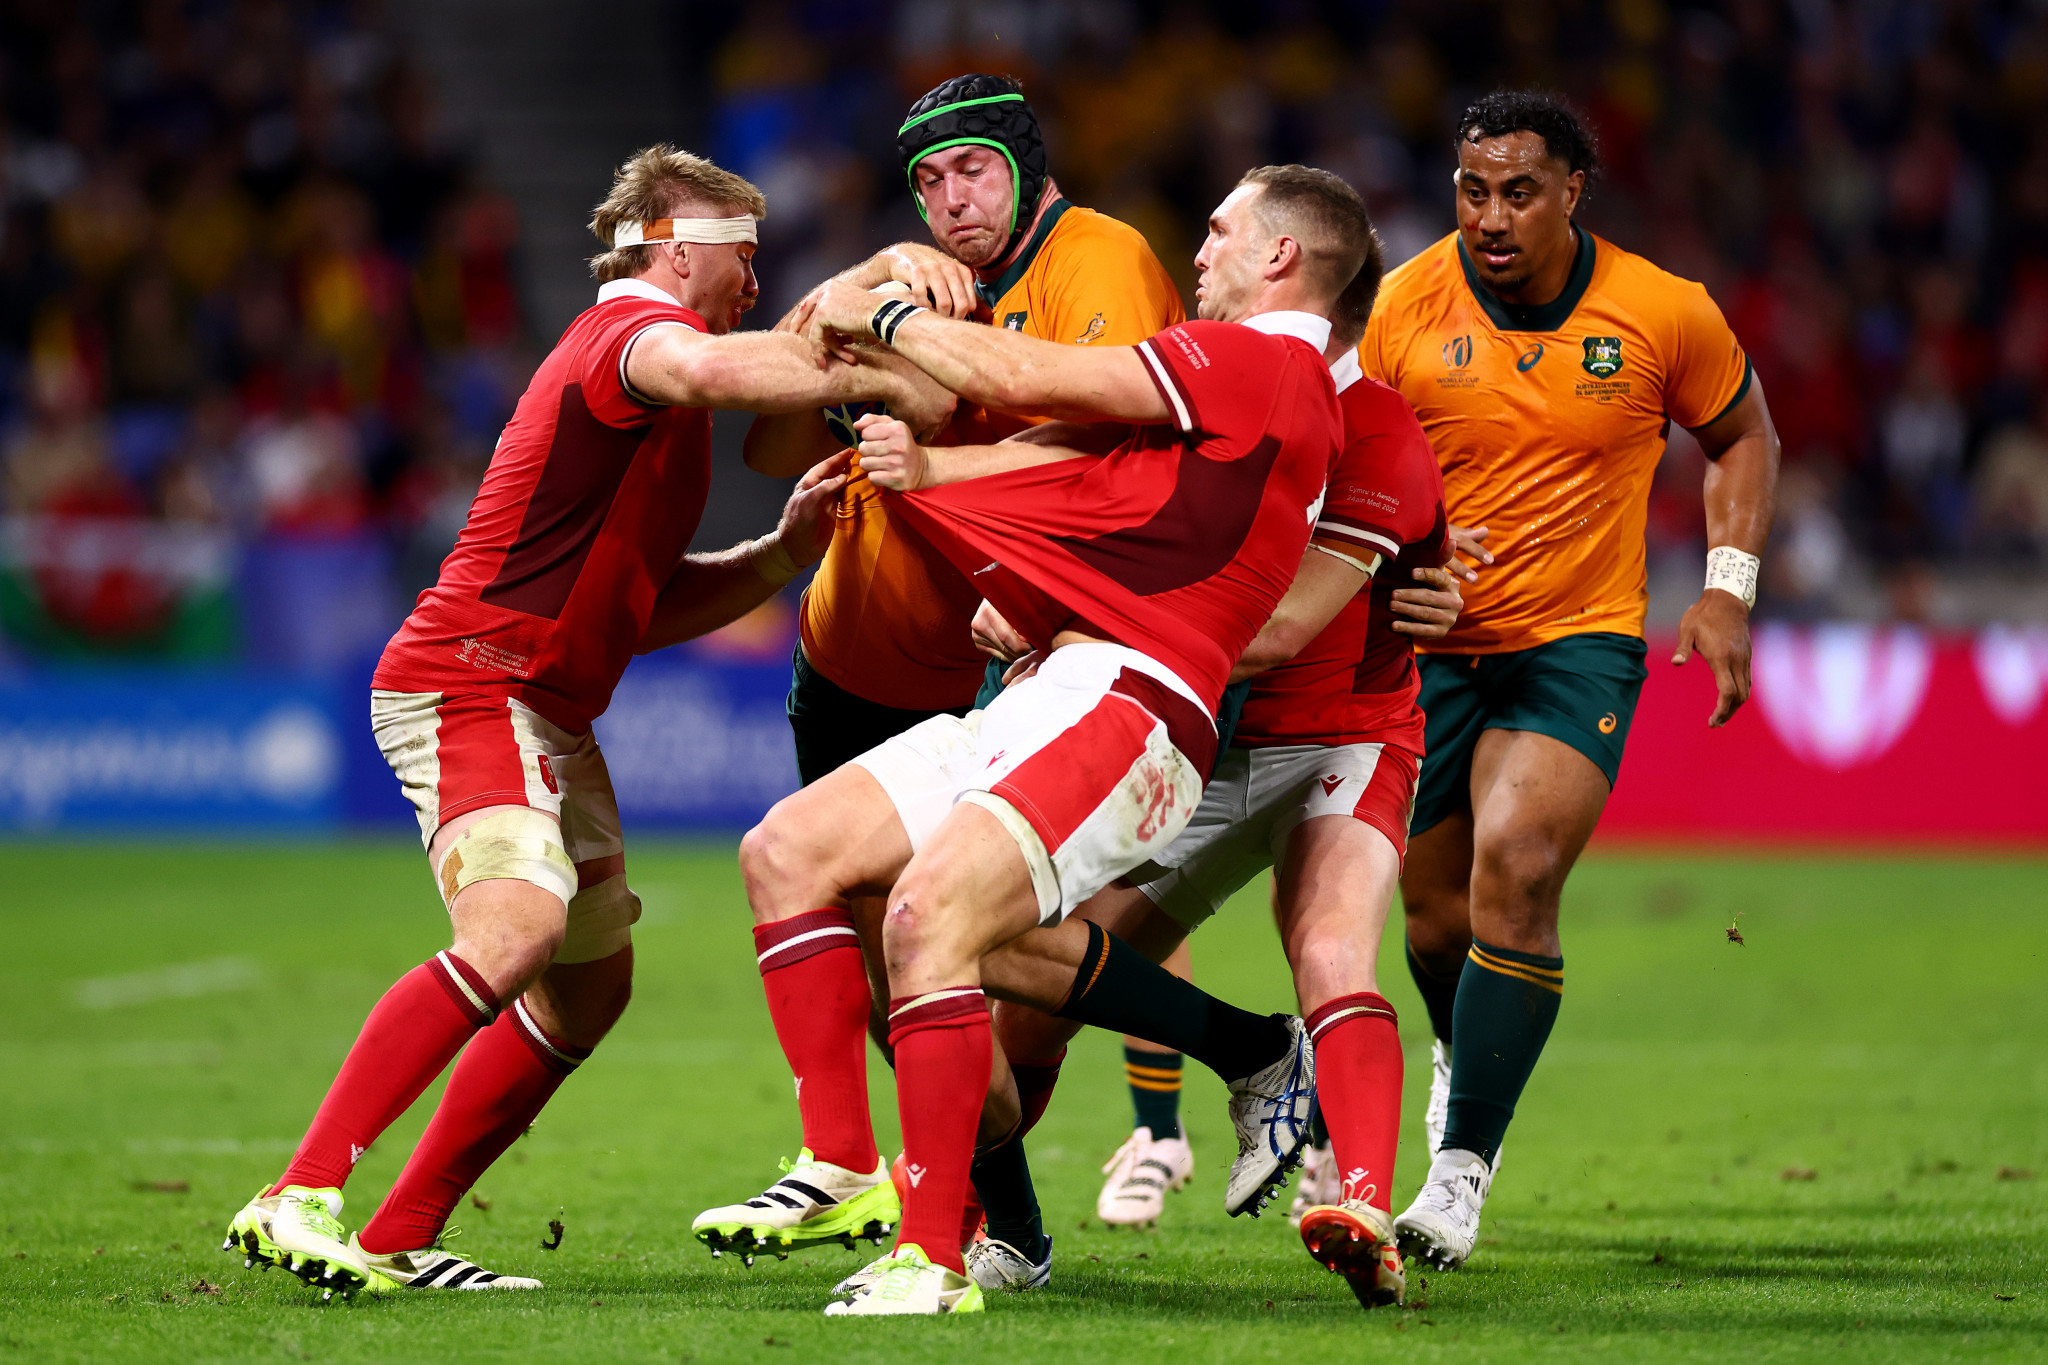 Wales produced a commanding display against a Wallabies side who face being eliminated at the pool stage for the first time at the Rugby World Cup ©Getty Images  